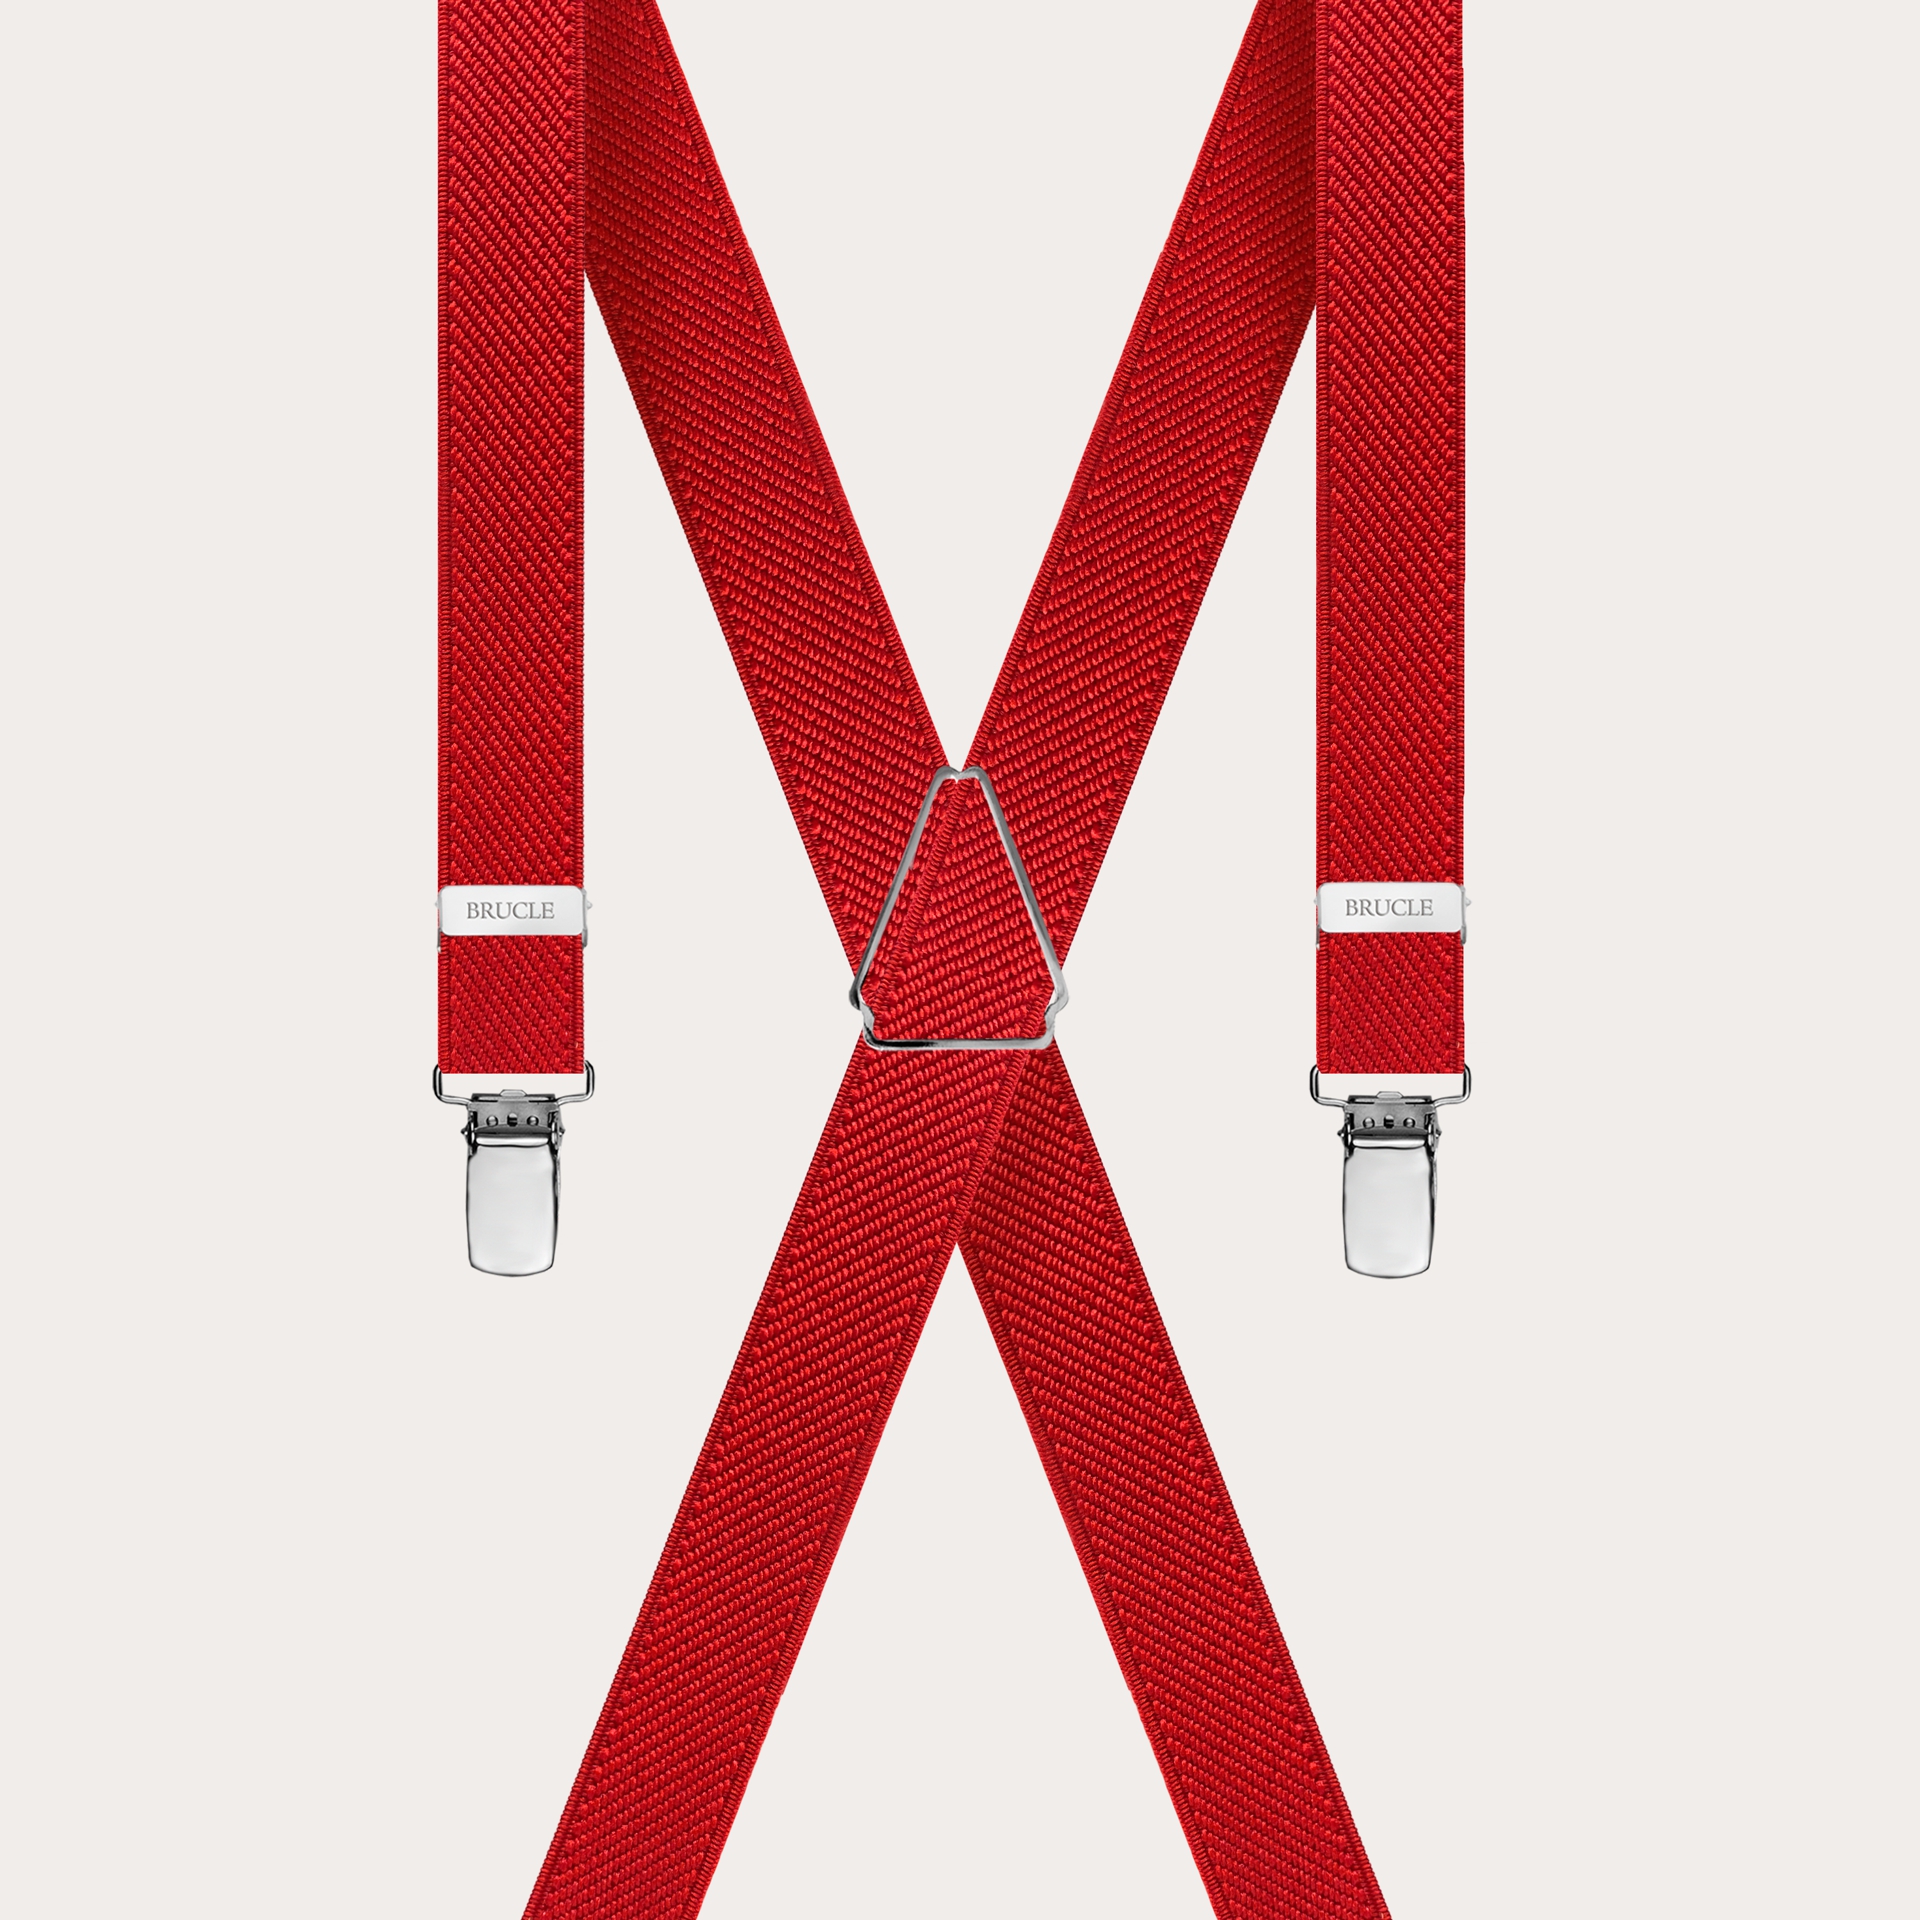 BRUCLE X-shaped suspenders for children and adolescents, red